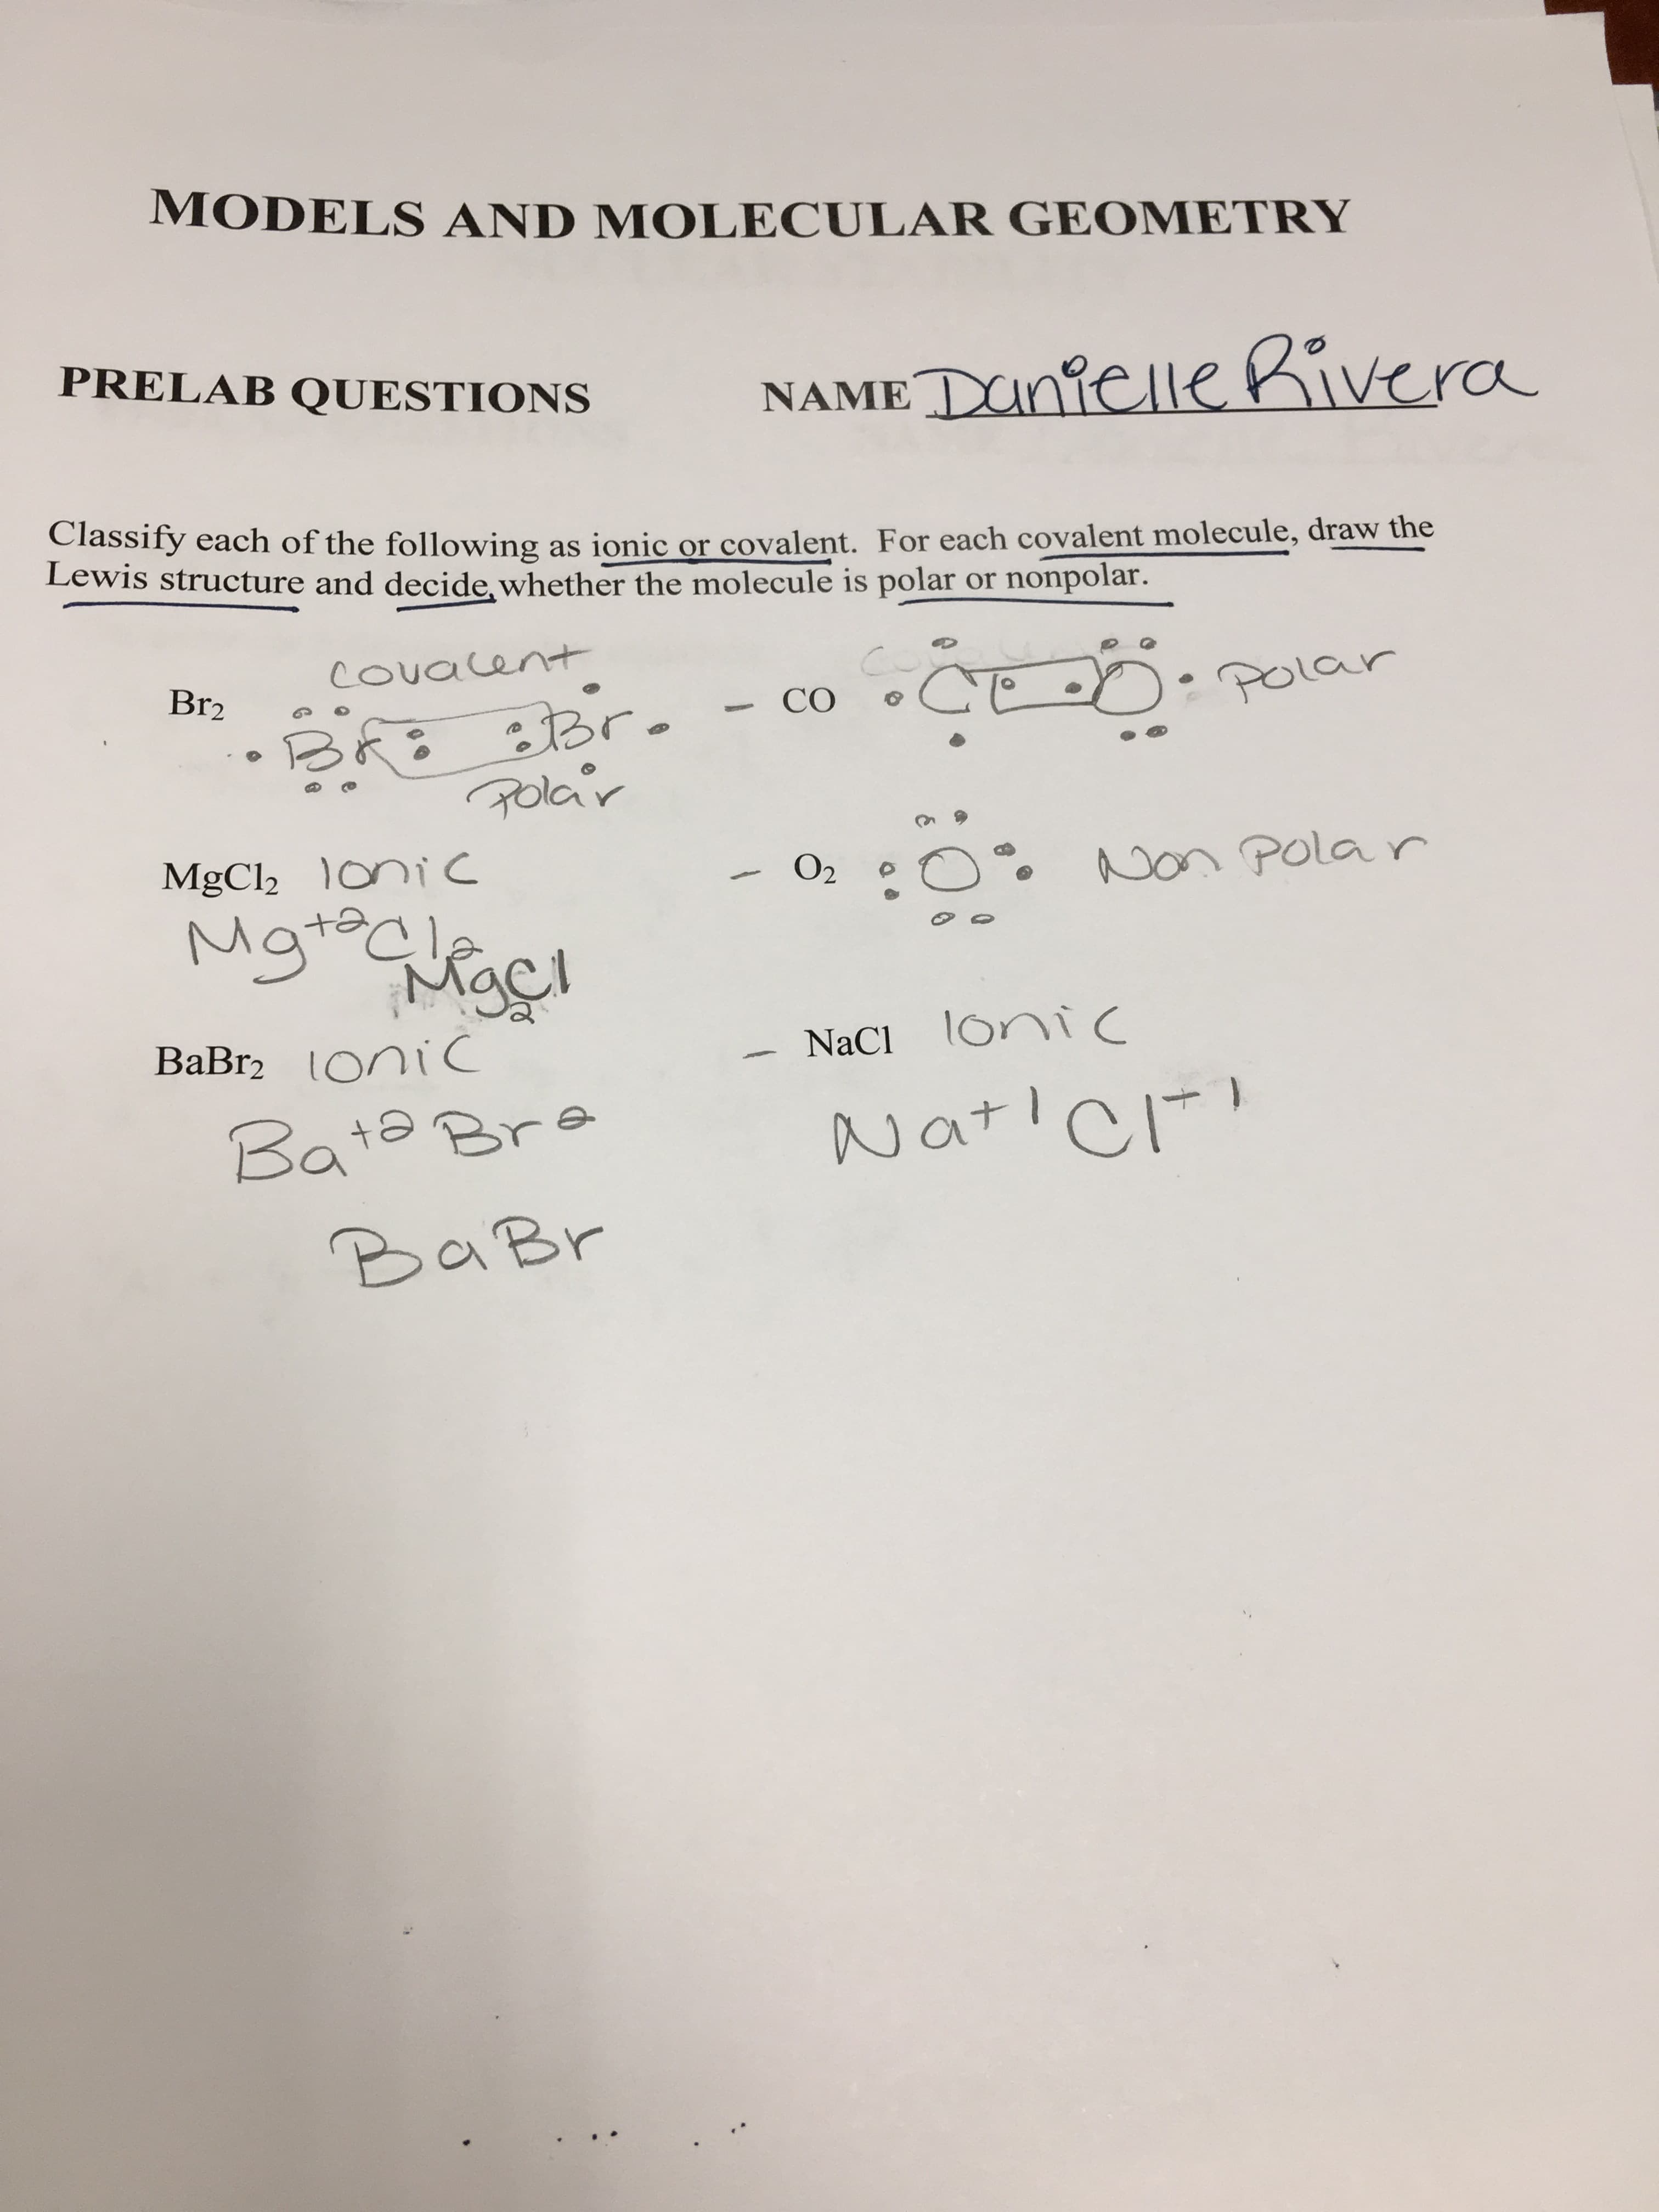 MODELS AND MOLECULAR GEOMETRY
PRELAB QUESTIONS
NAME Dnielle Kivera
Classify each of the following
Lewis structure and decide, whether the molecule is polar or nonpolar.
as ionic or covalent. For each covalent molecule, draw the
COuacent
Br2
POLar
BR Br
Golar
CO
MgCl2 oniC
Non Pola r
O2
సంసల
Mgrle
c
NaCl oni
BaBr2 OniC
Ionic
Natic
Bate Bre
BaBr
